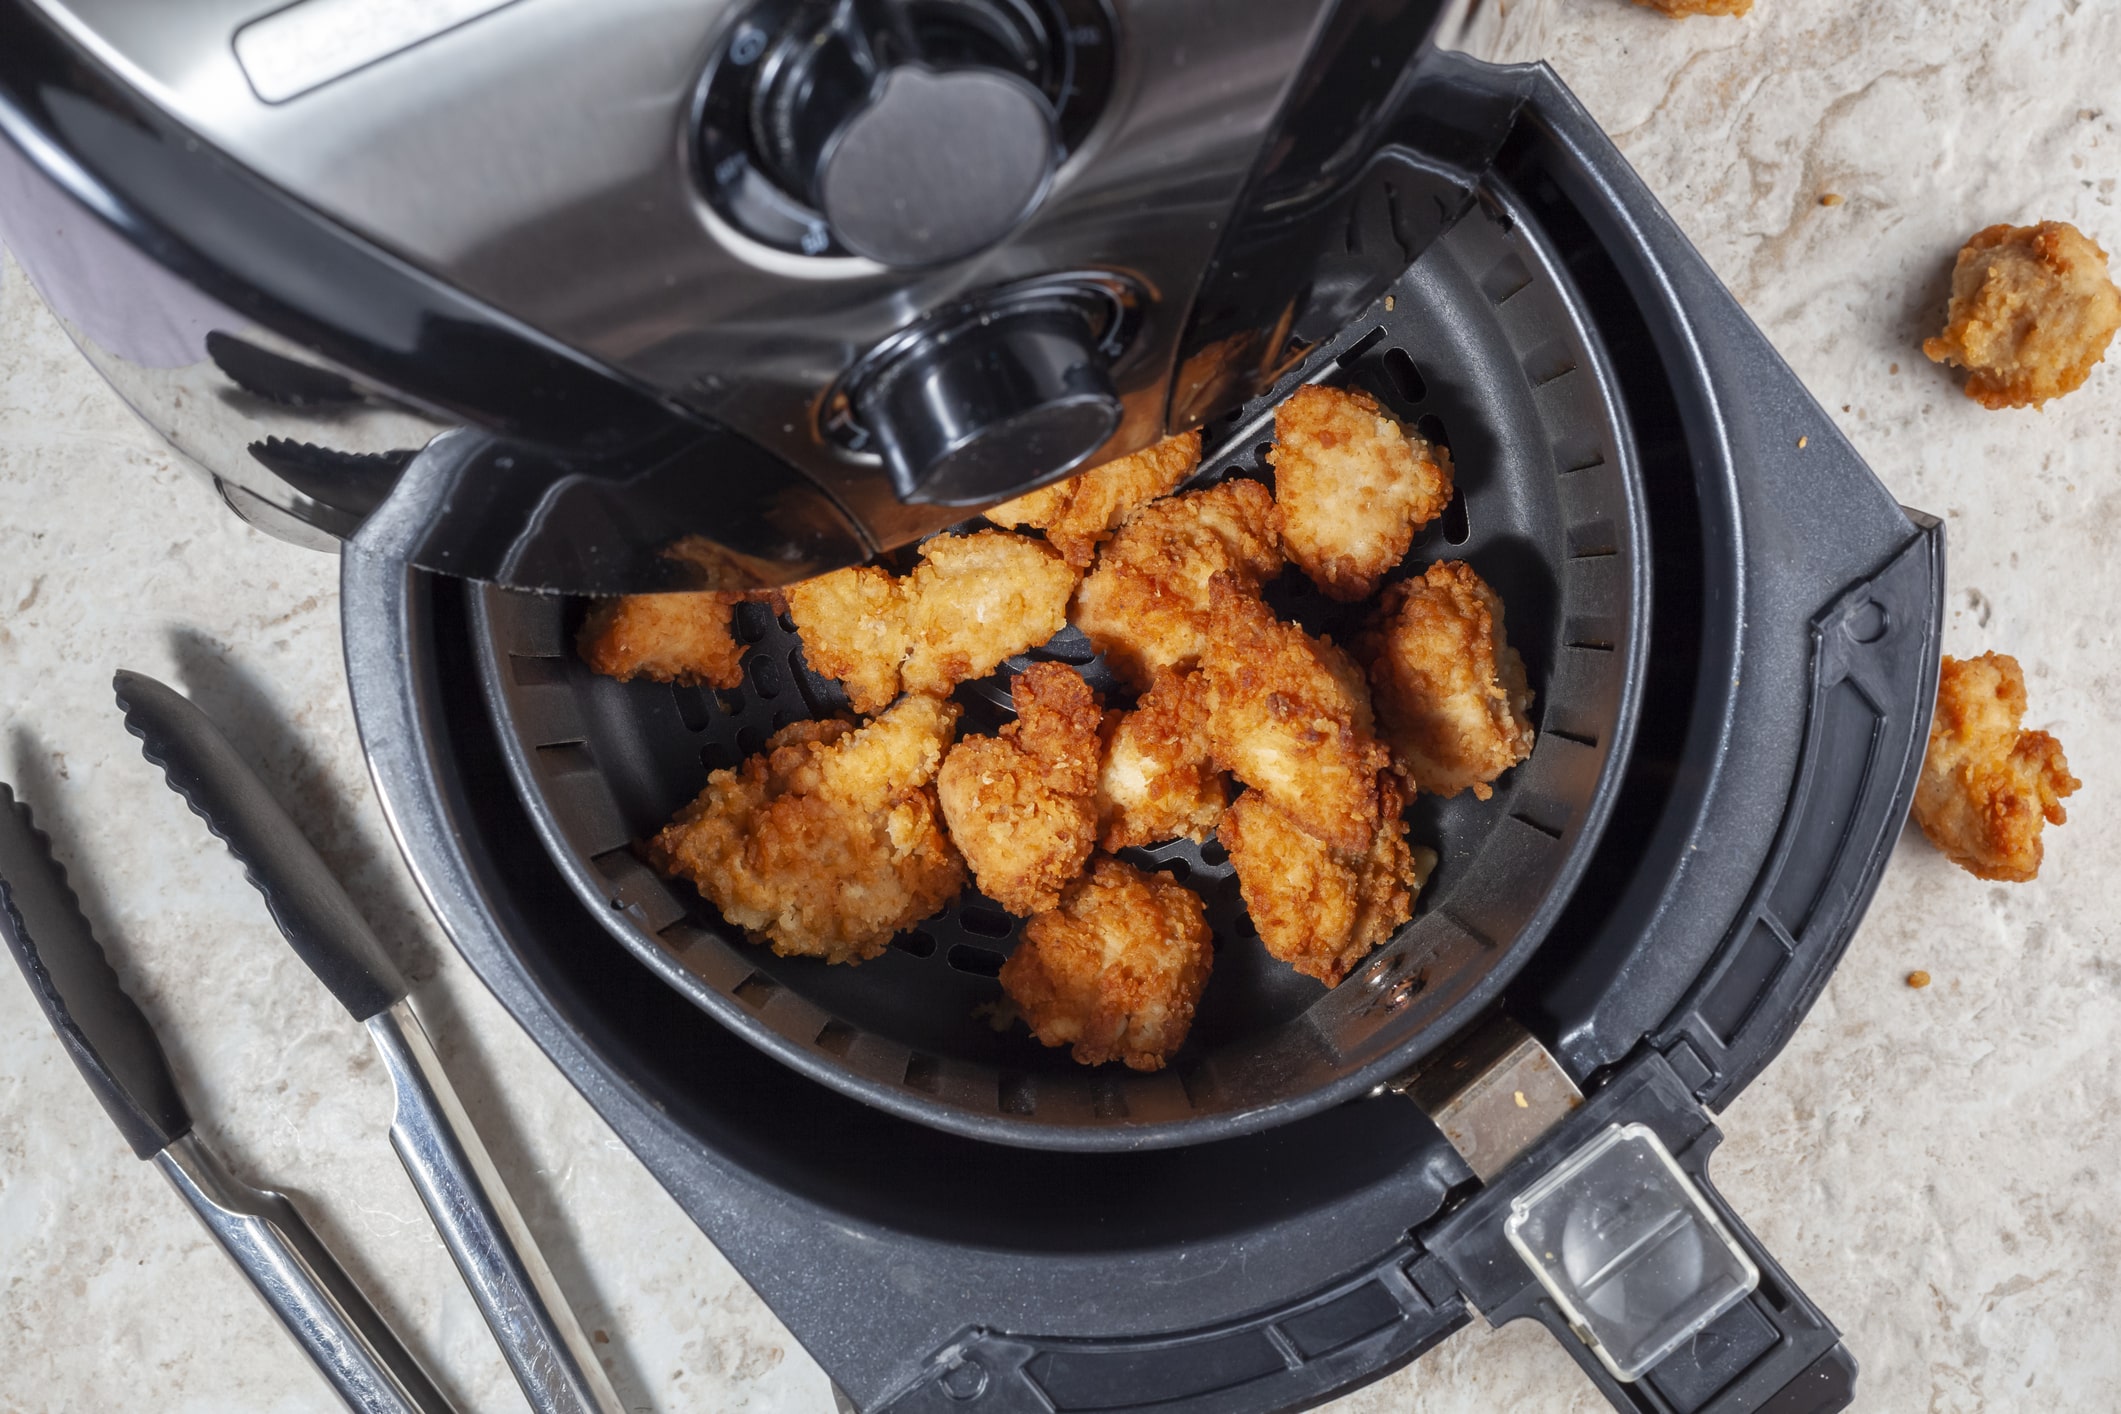 https://www.familyeducation.com/sites/default/files/inline-images/airfryer%20chicken%20nuggets.jpg